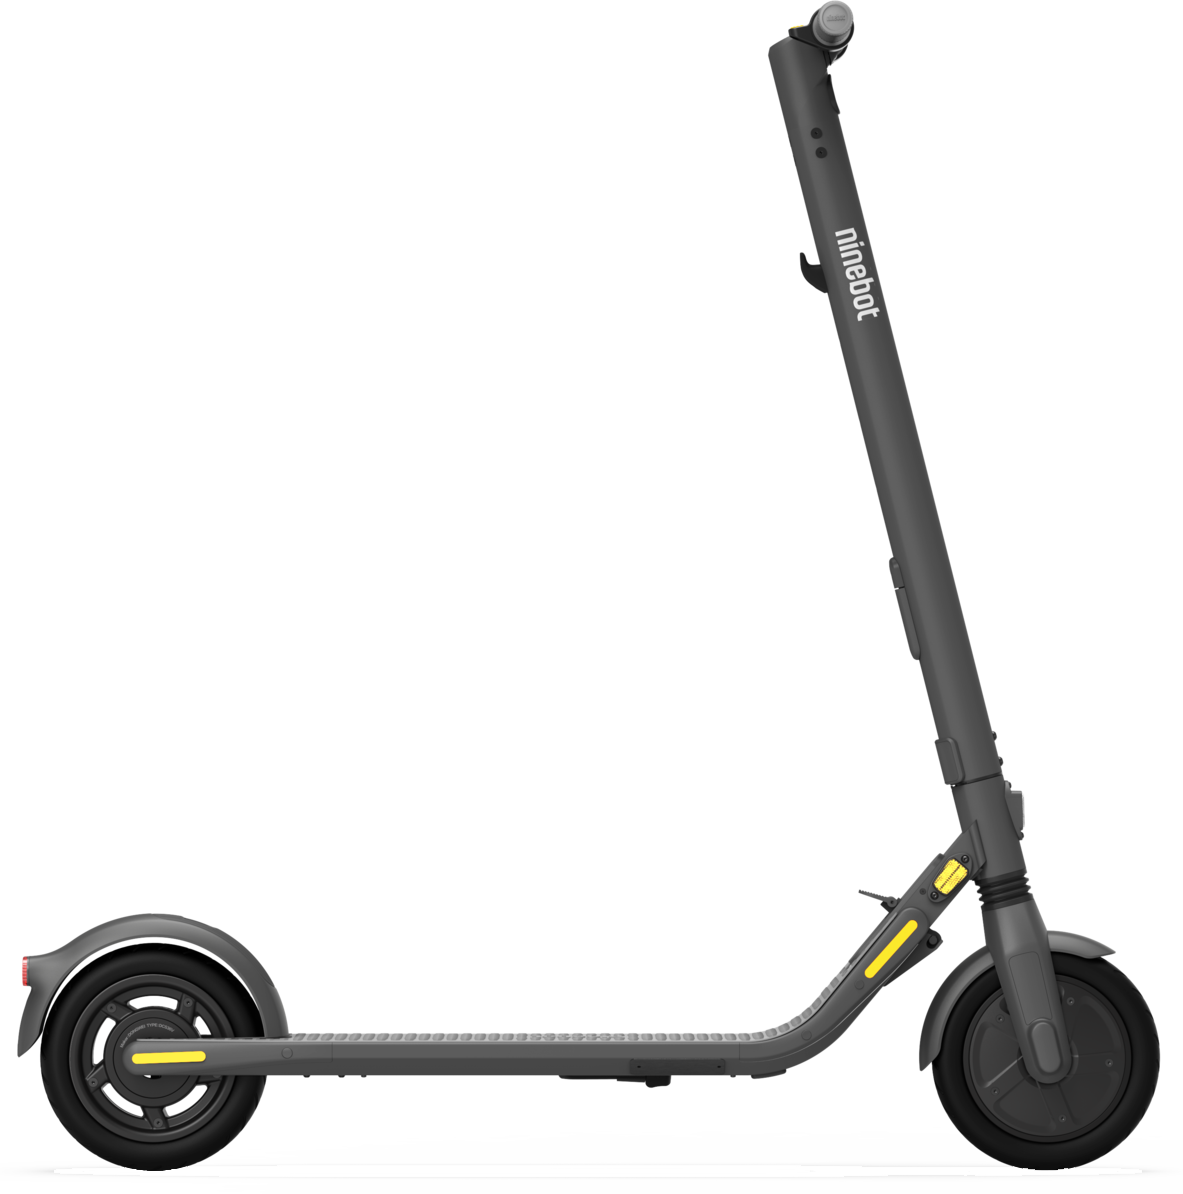 Ninebot E25A Kick-Scooter by Segway - Certified Pre-Owned